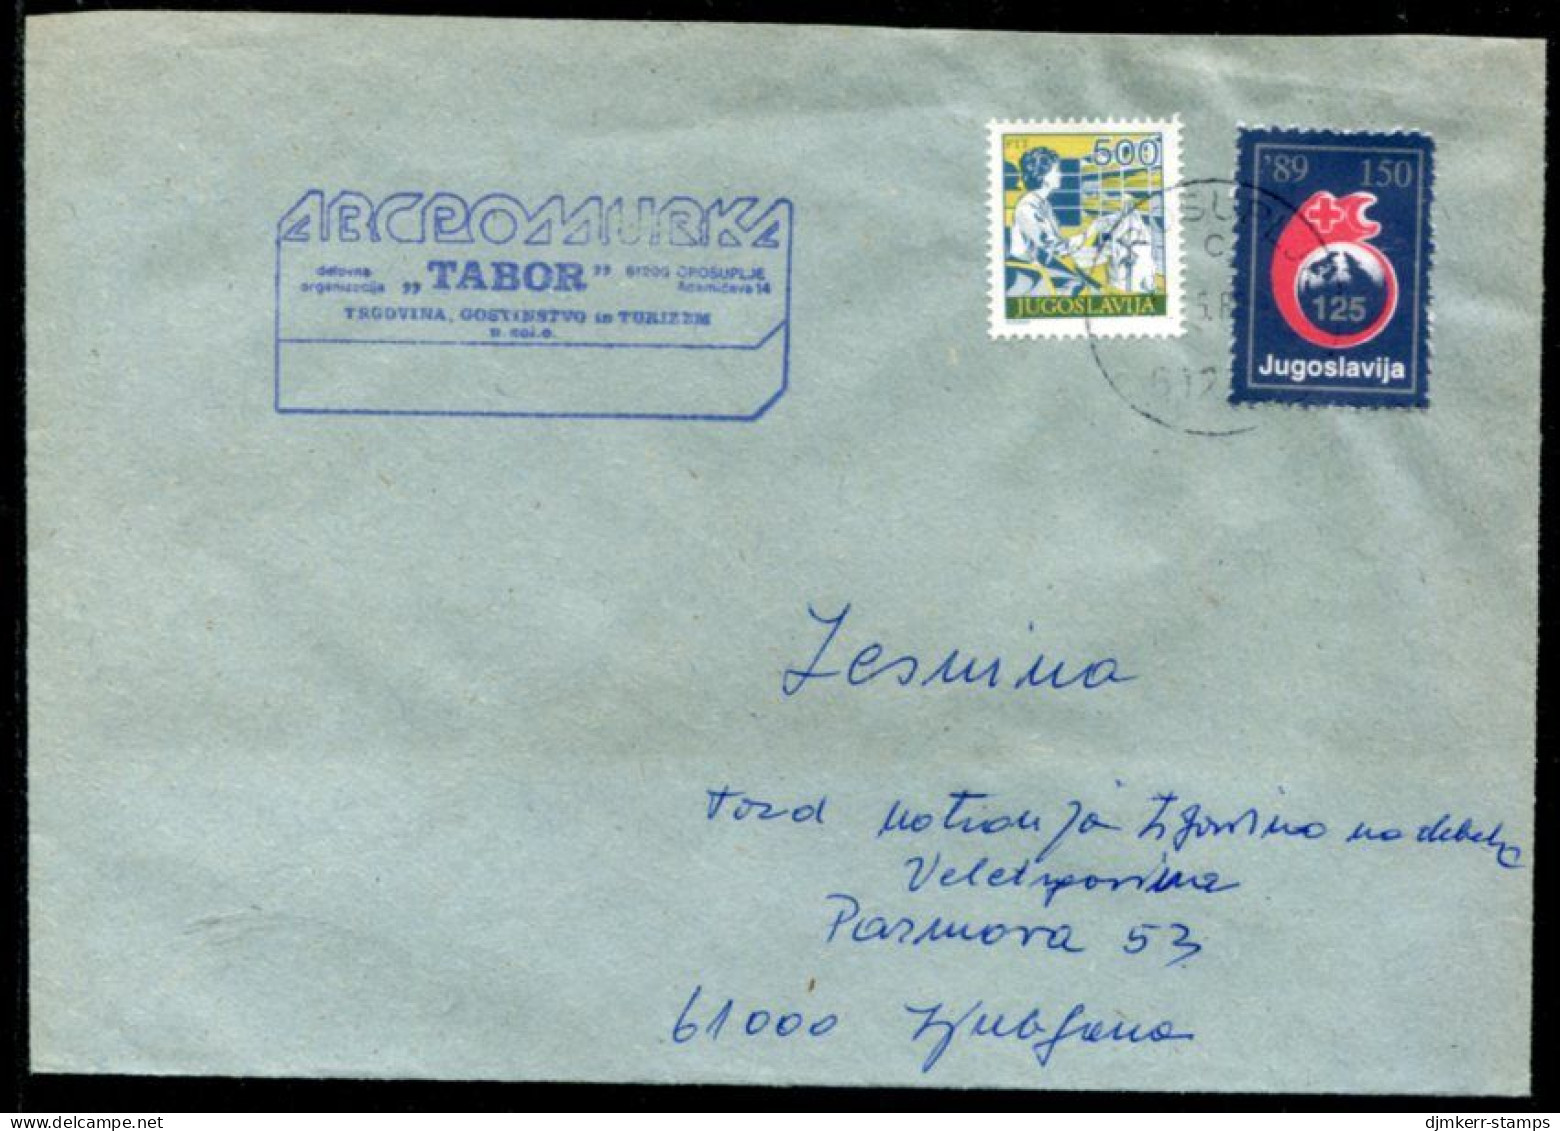 YUGOSLAVIA 1989 Commercial Cover With Red Cross Week 150 D Tax.  Michel ZZM 169 - Wohlfahrtsmarken